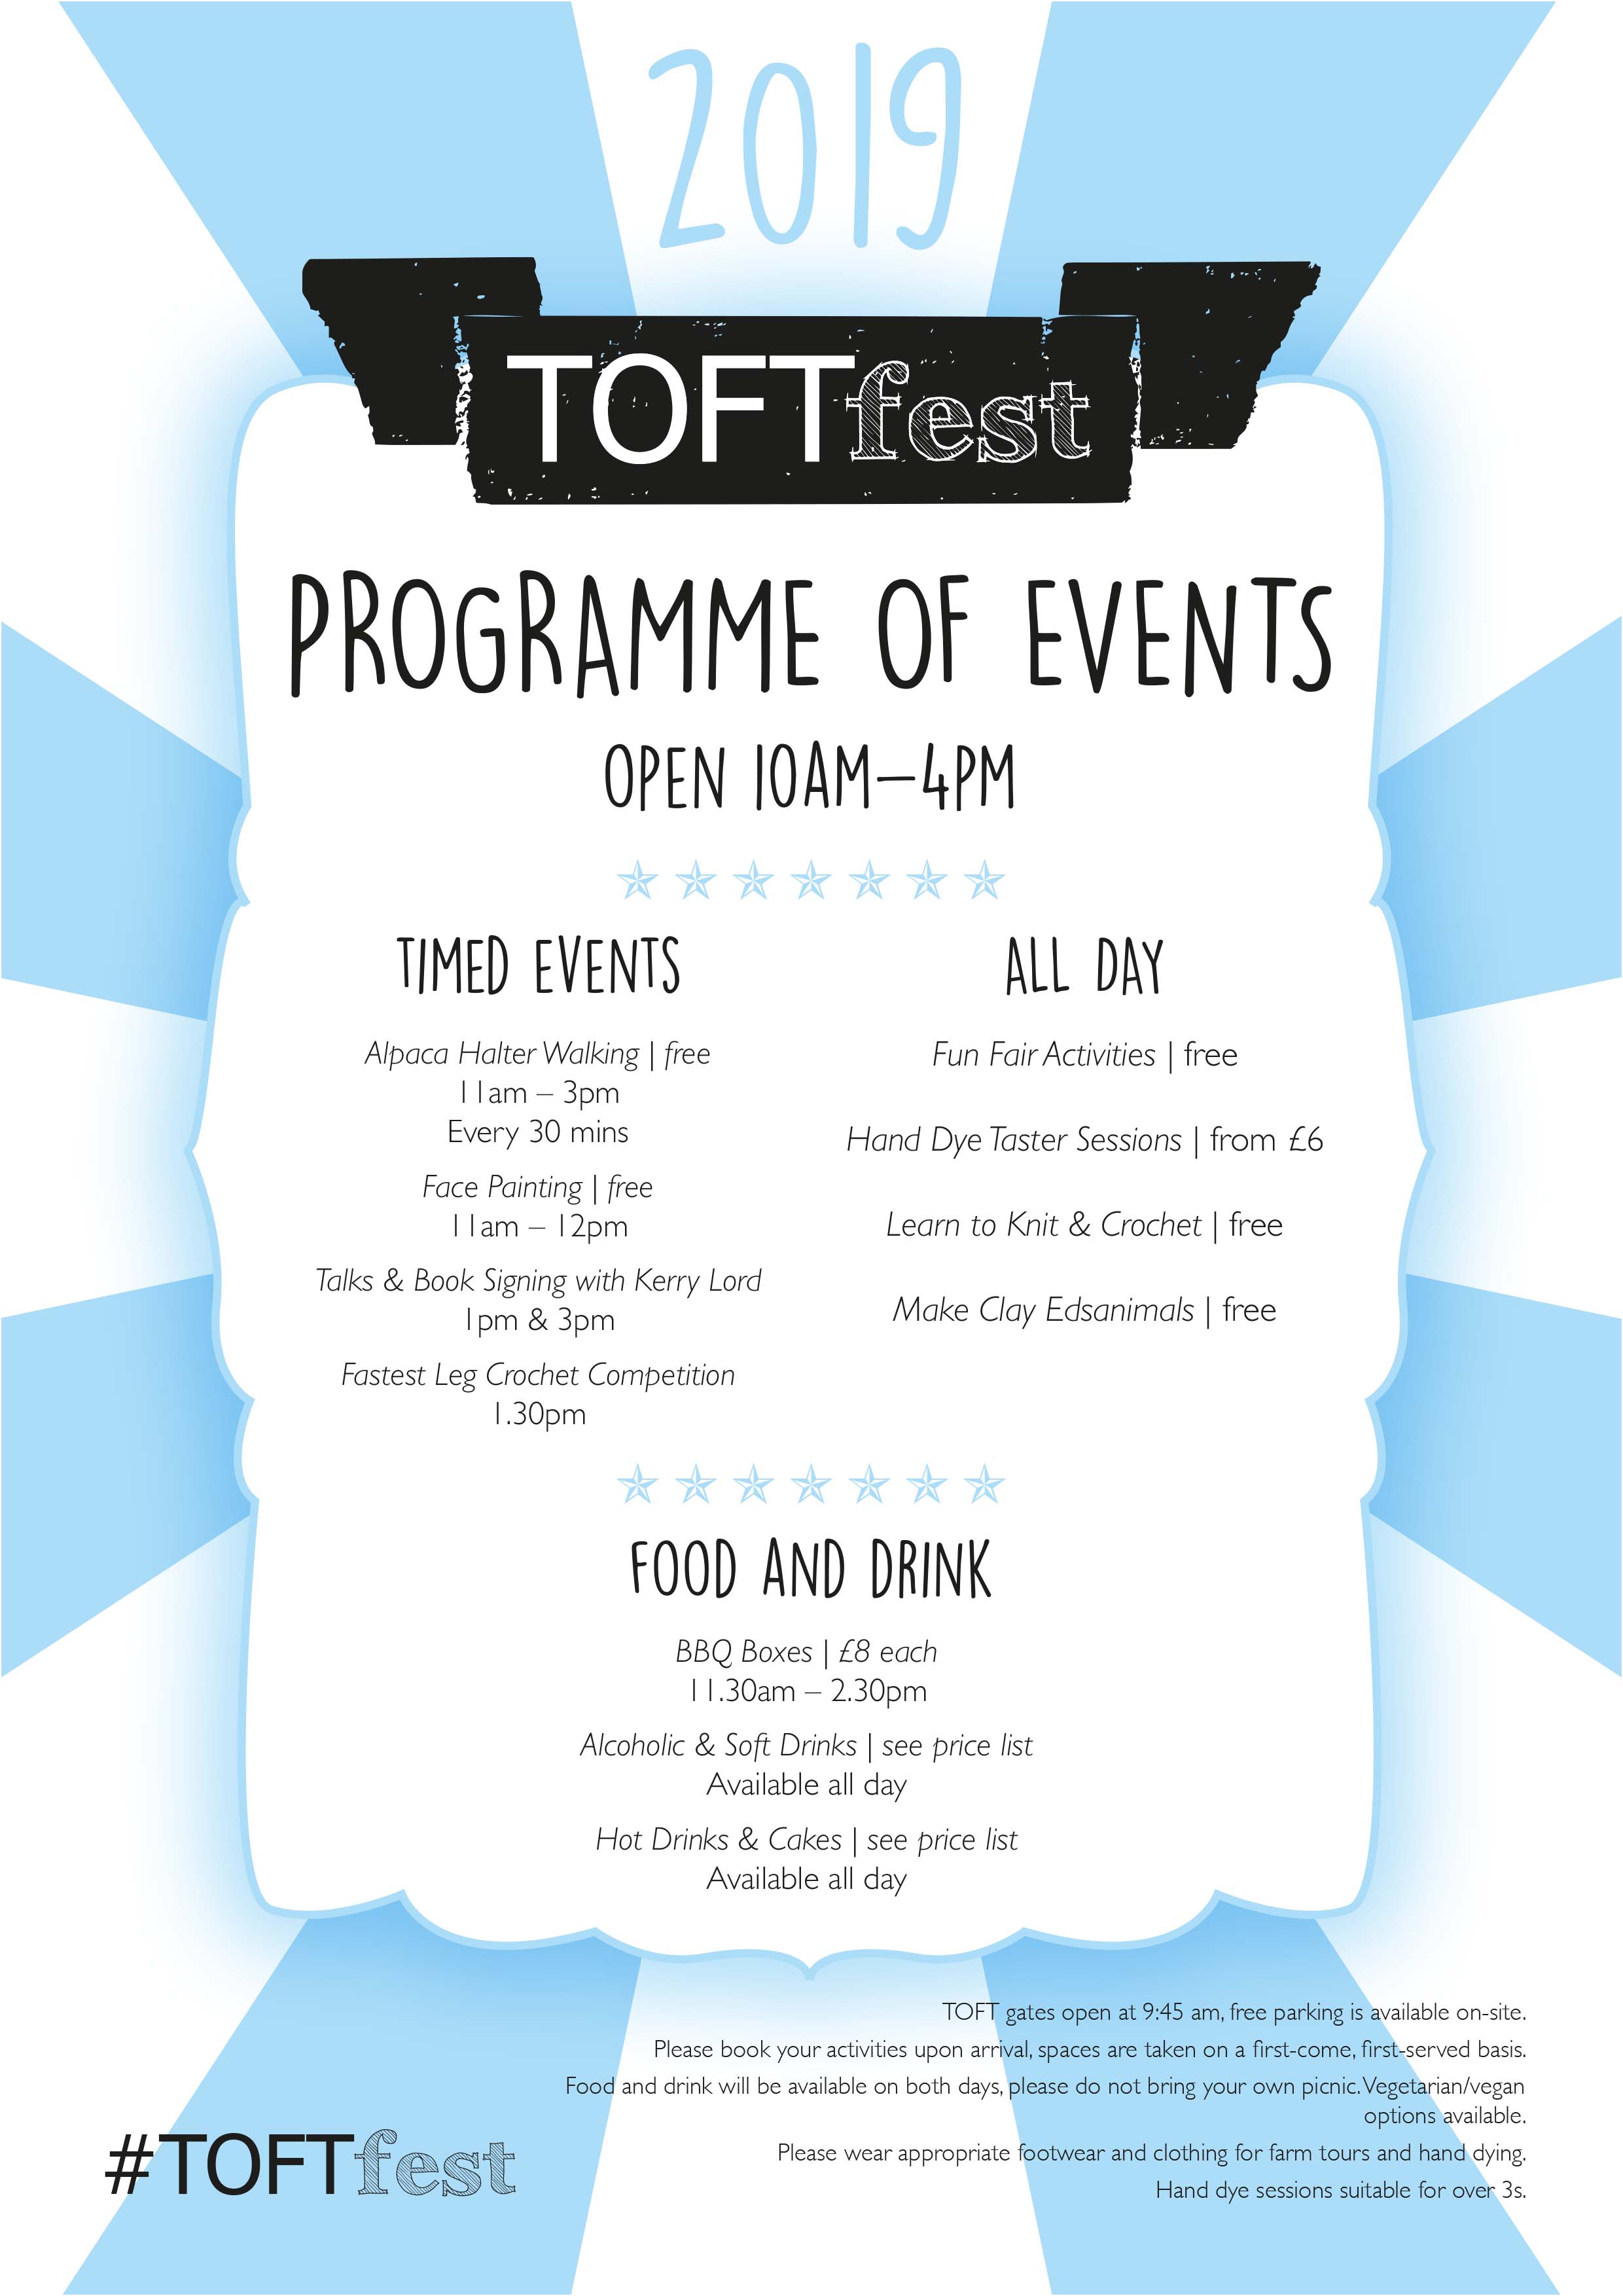 TOFTfest 2019 programme of events